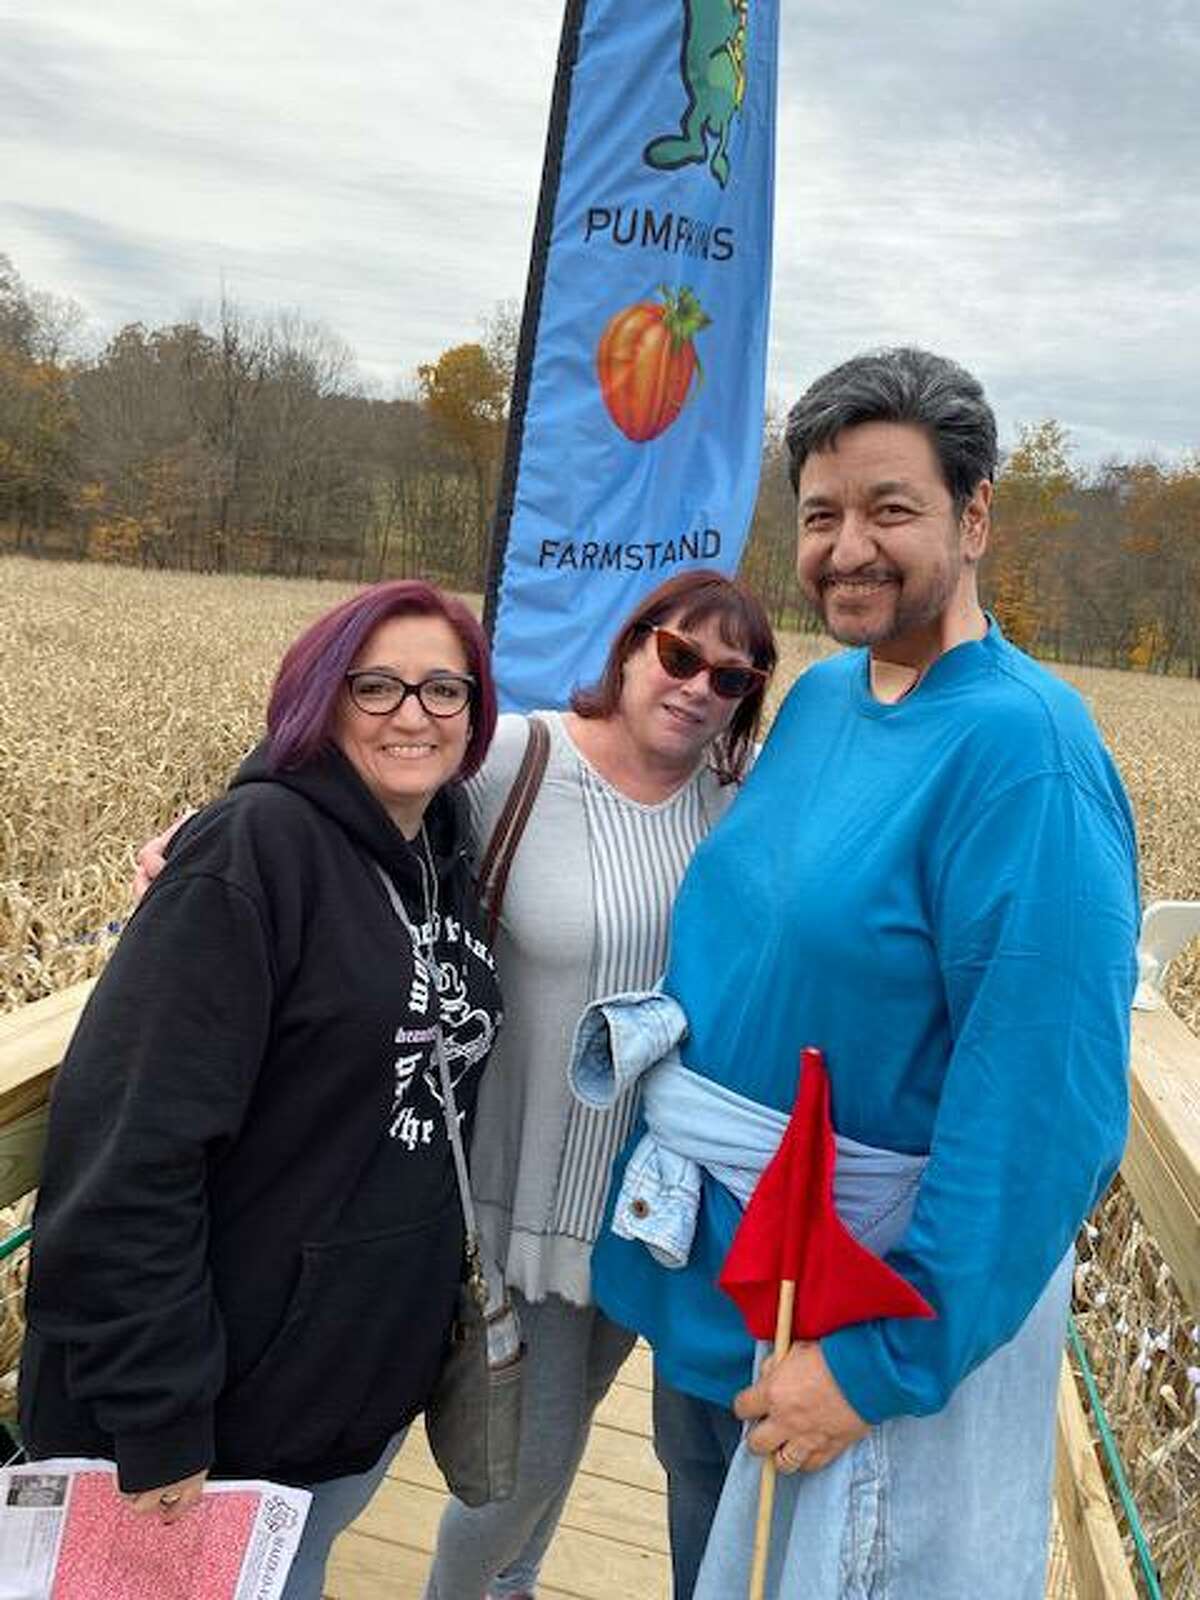 Reina joins Tony and Laura to celebrate Halloween in Connecticut